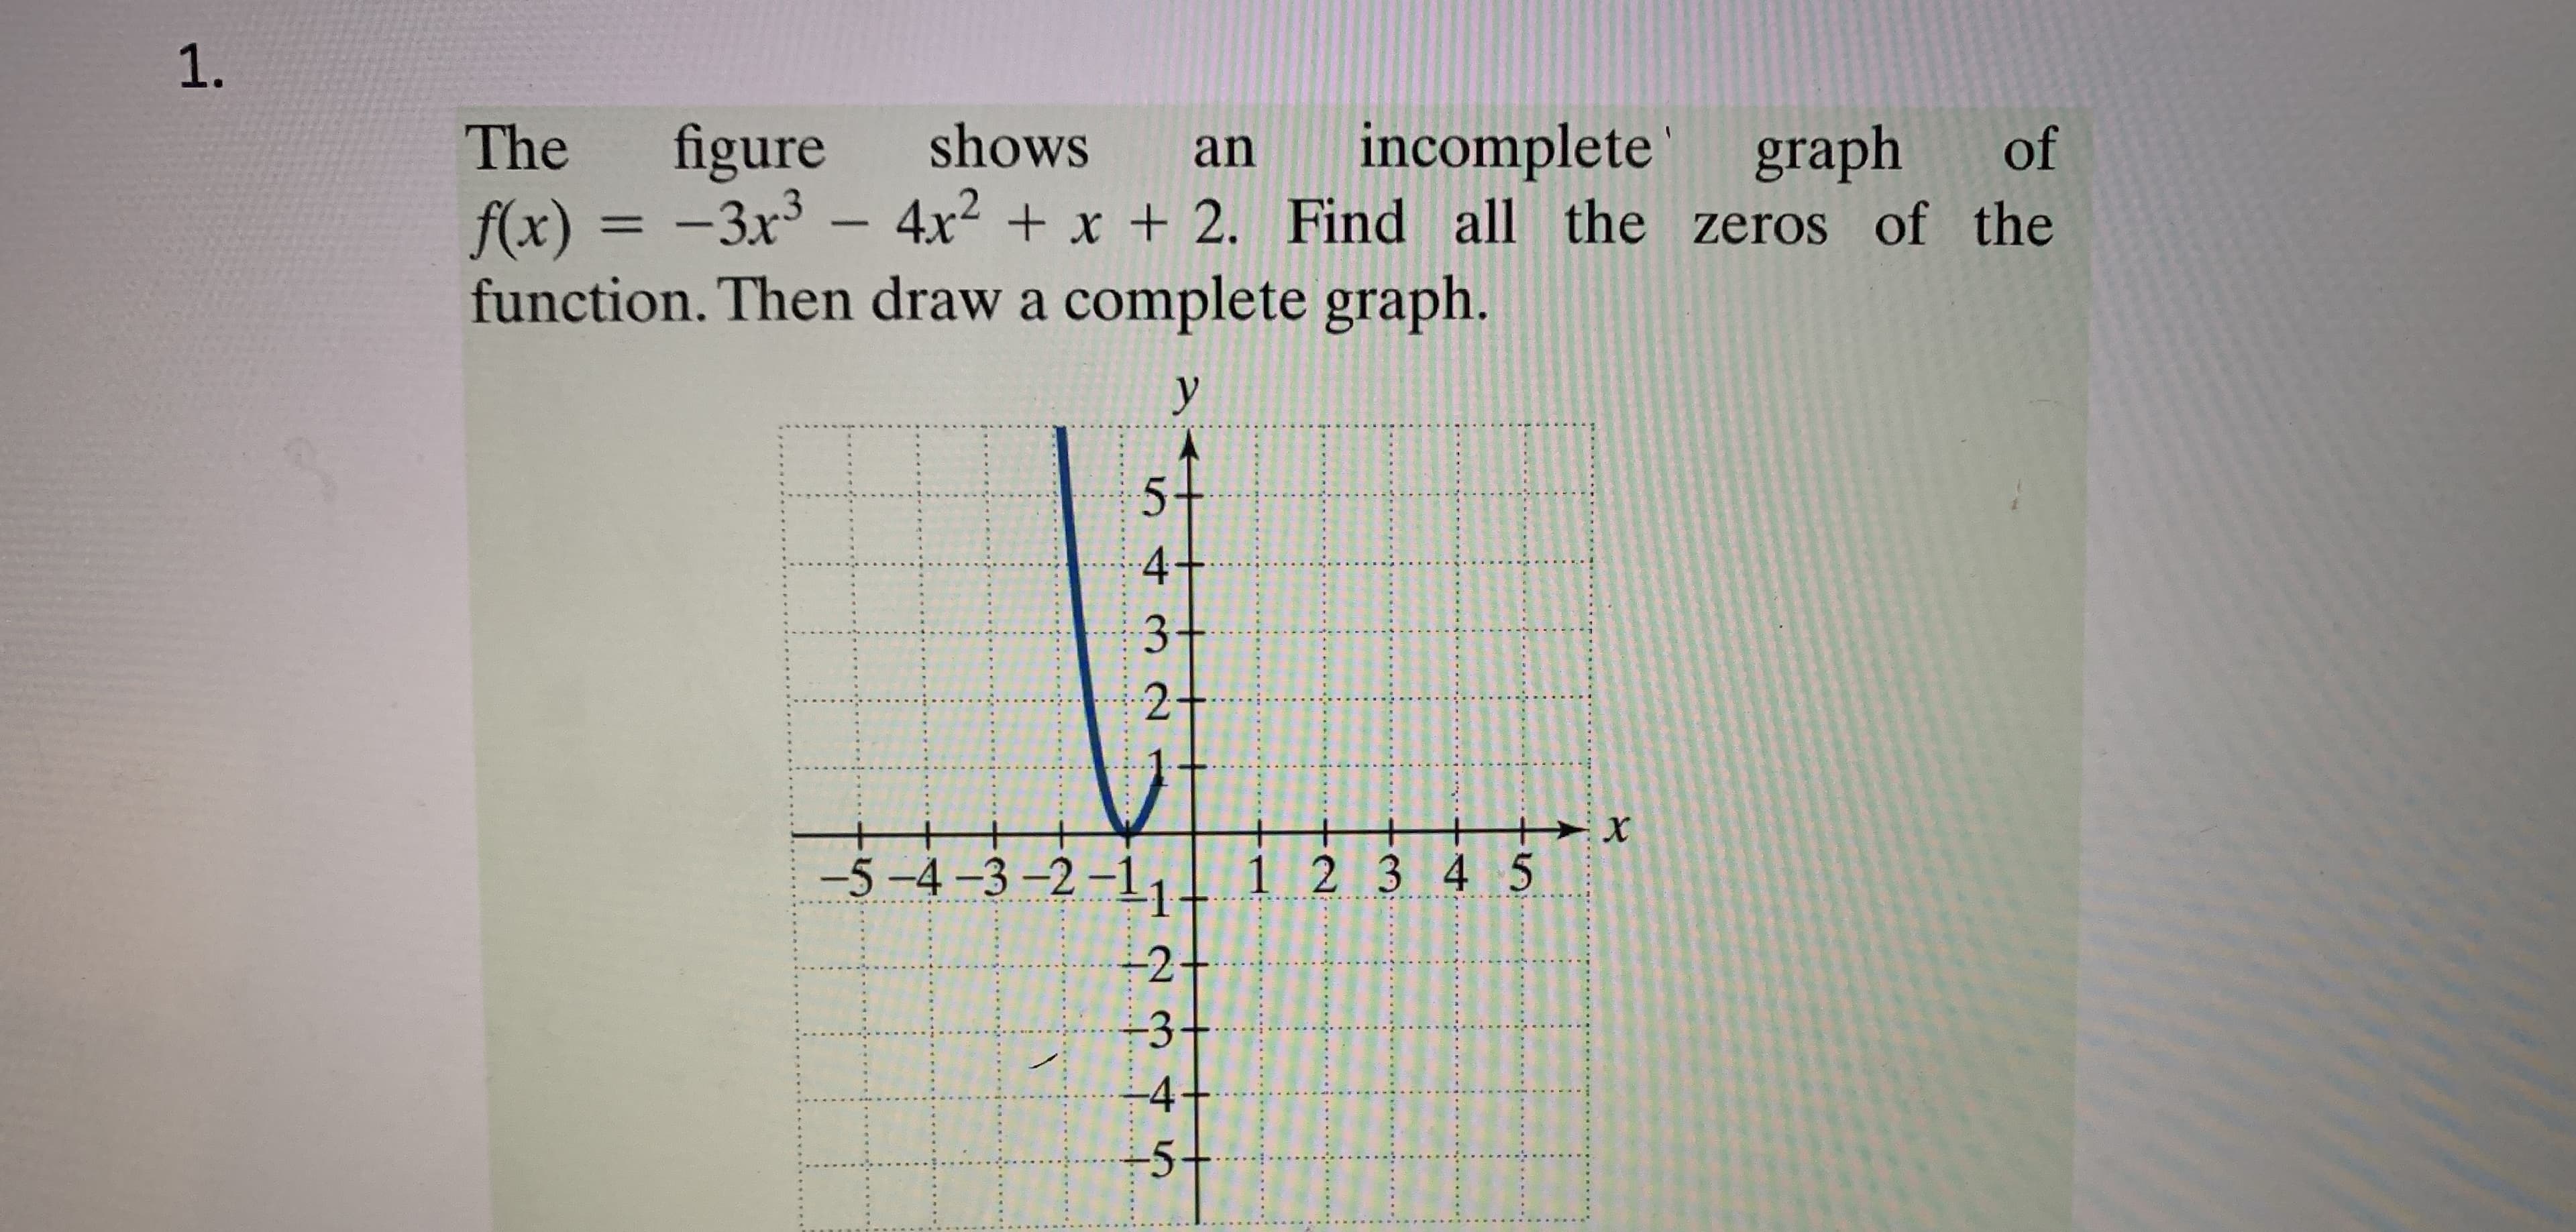 shows
incomplete graph
figure
-3x³ – 4x? + x + 2. Find all the zeros of the
tion. Then draw a complete graph.
an
of
%3D
y
5.
4+
3+
2+
-5 -4 -3 –2 –1,
1234 5
